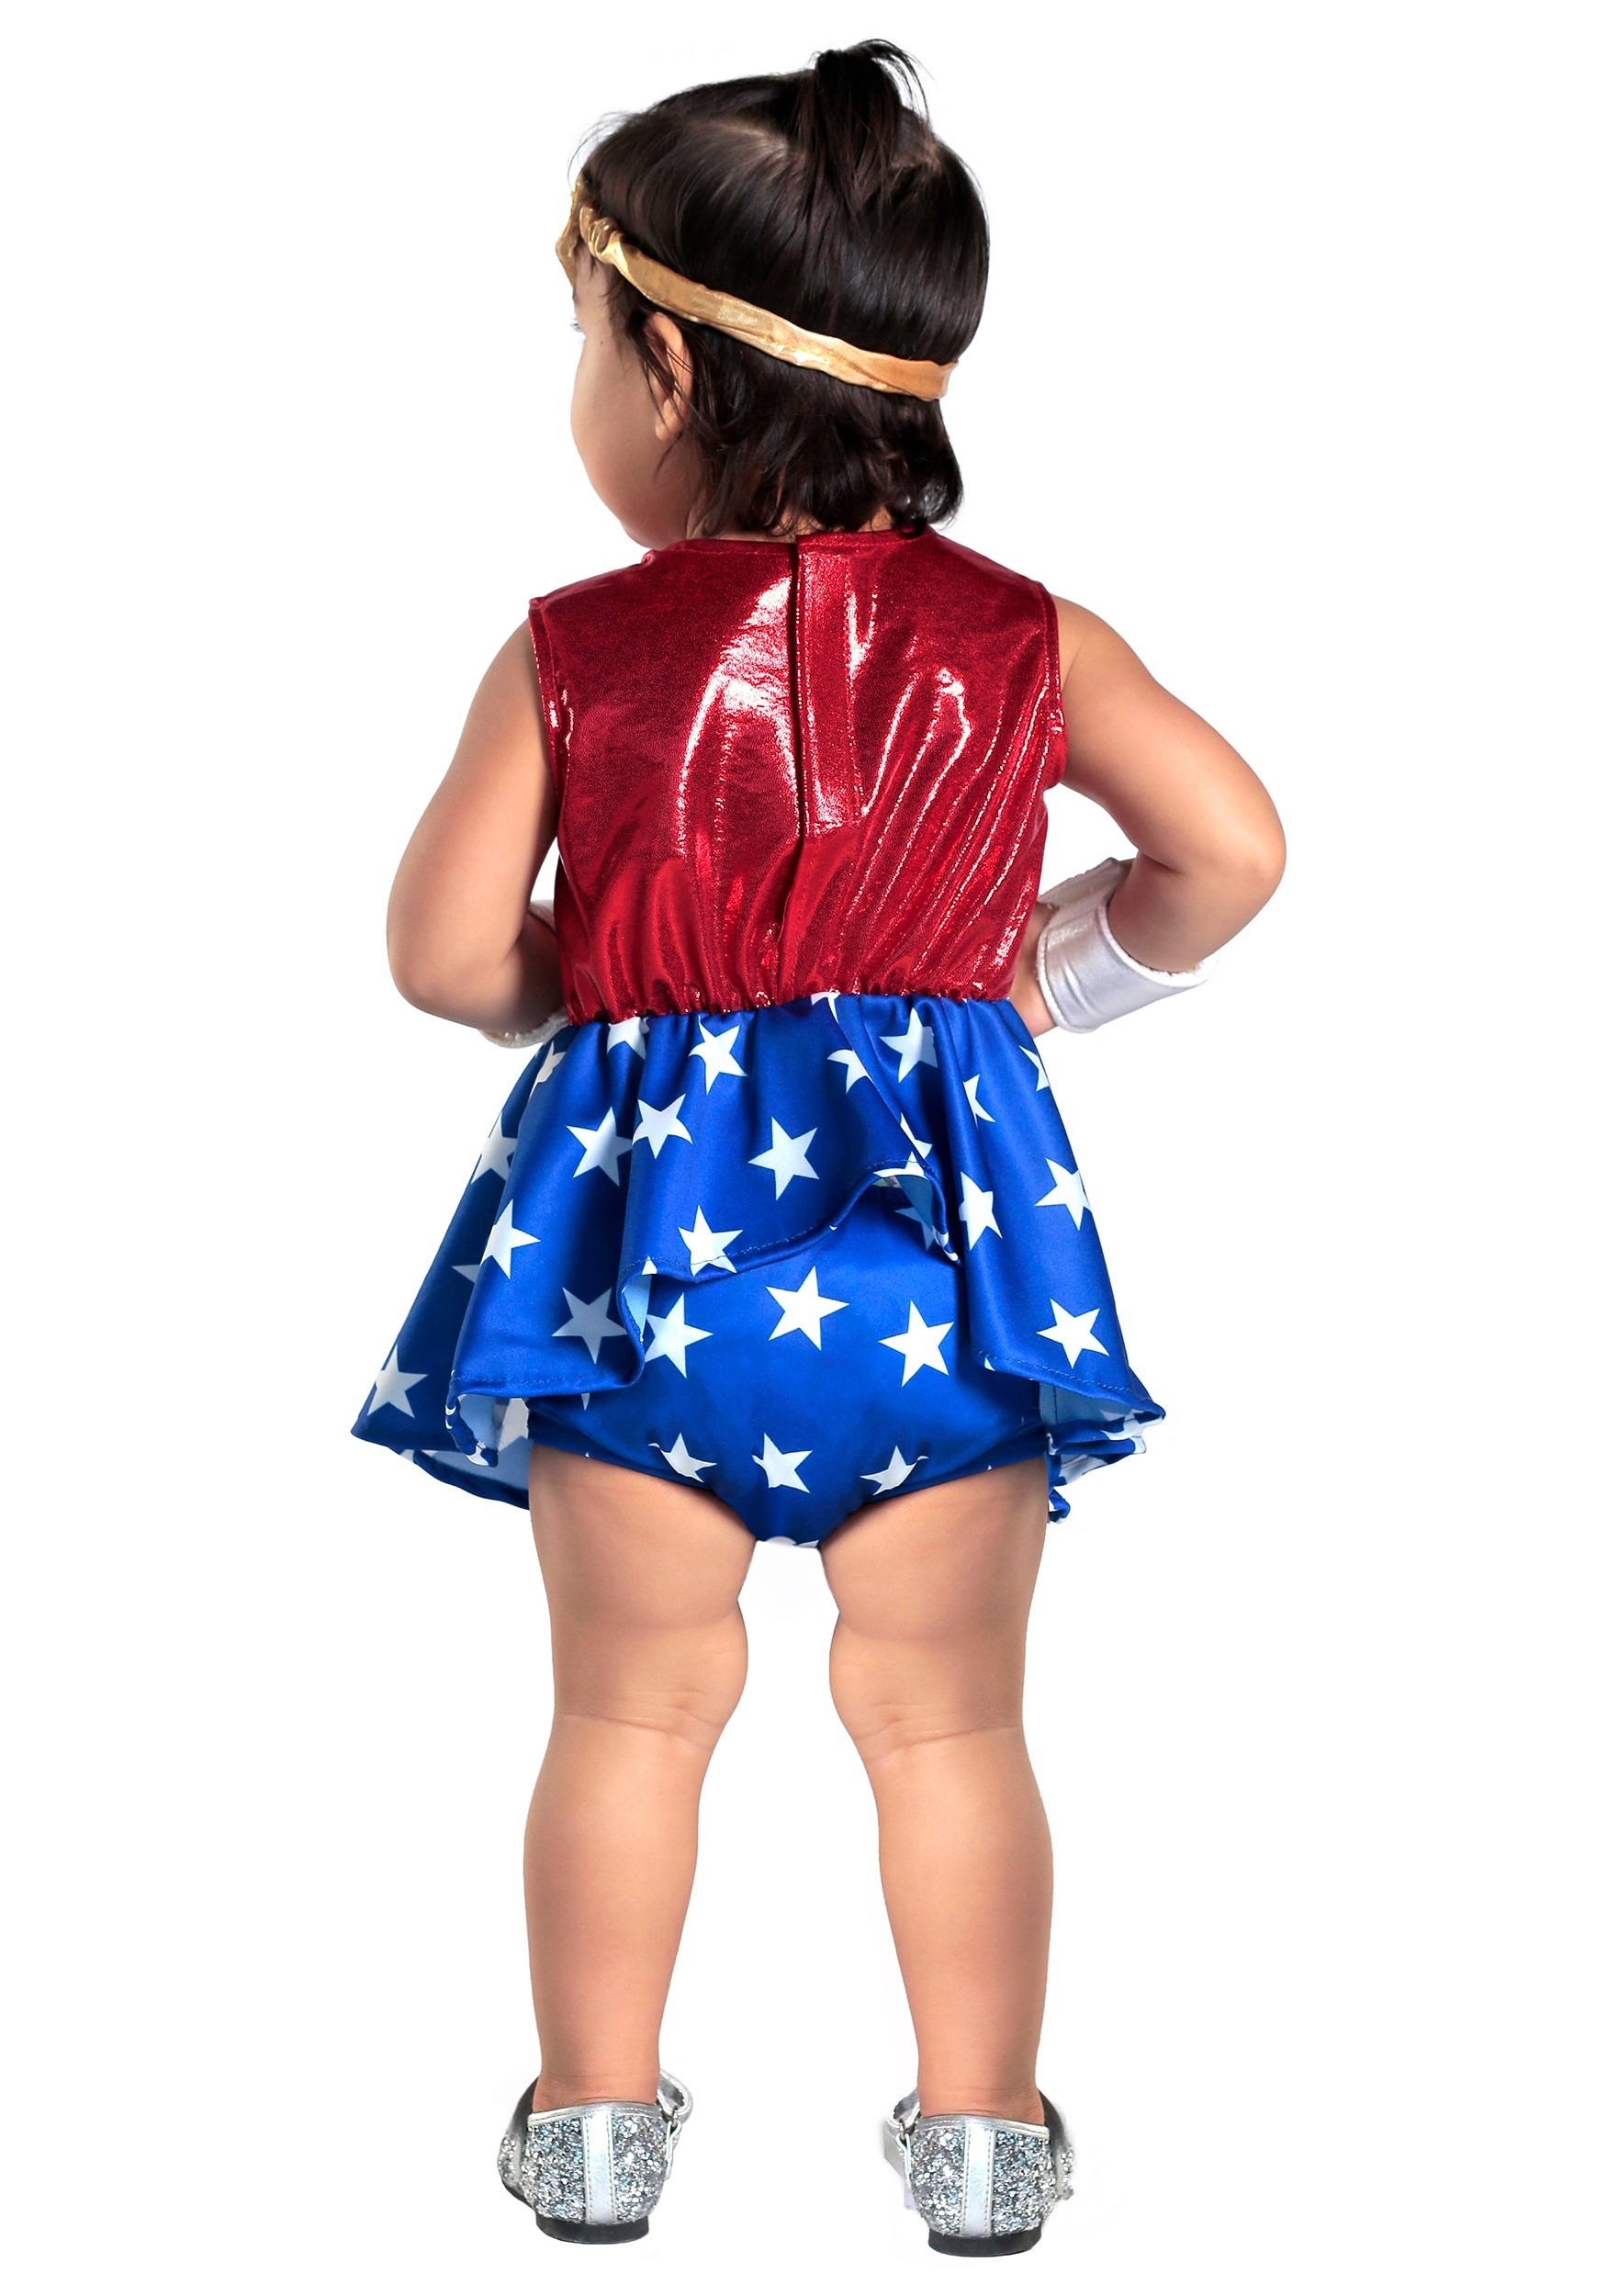 Wonder Woman Costume For Toddlers